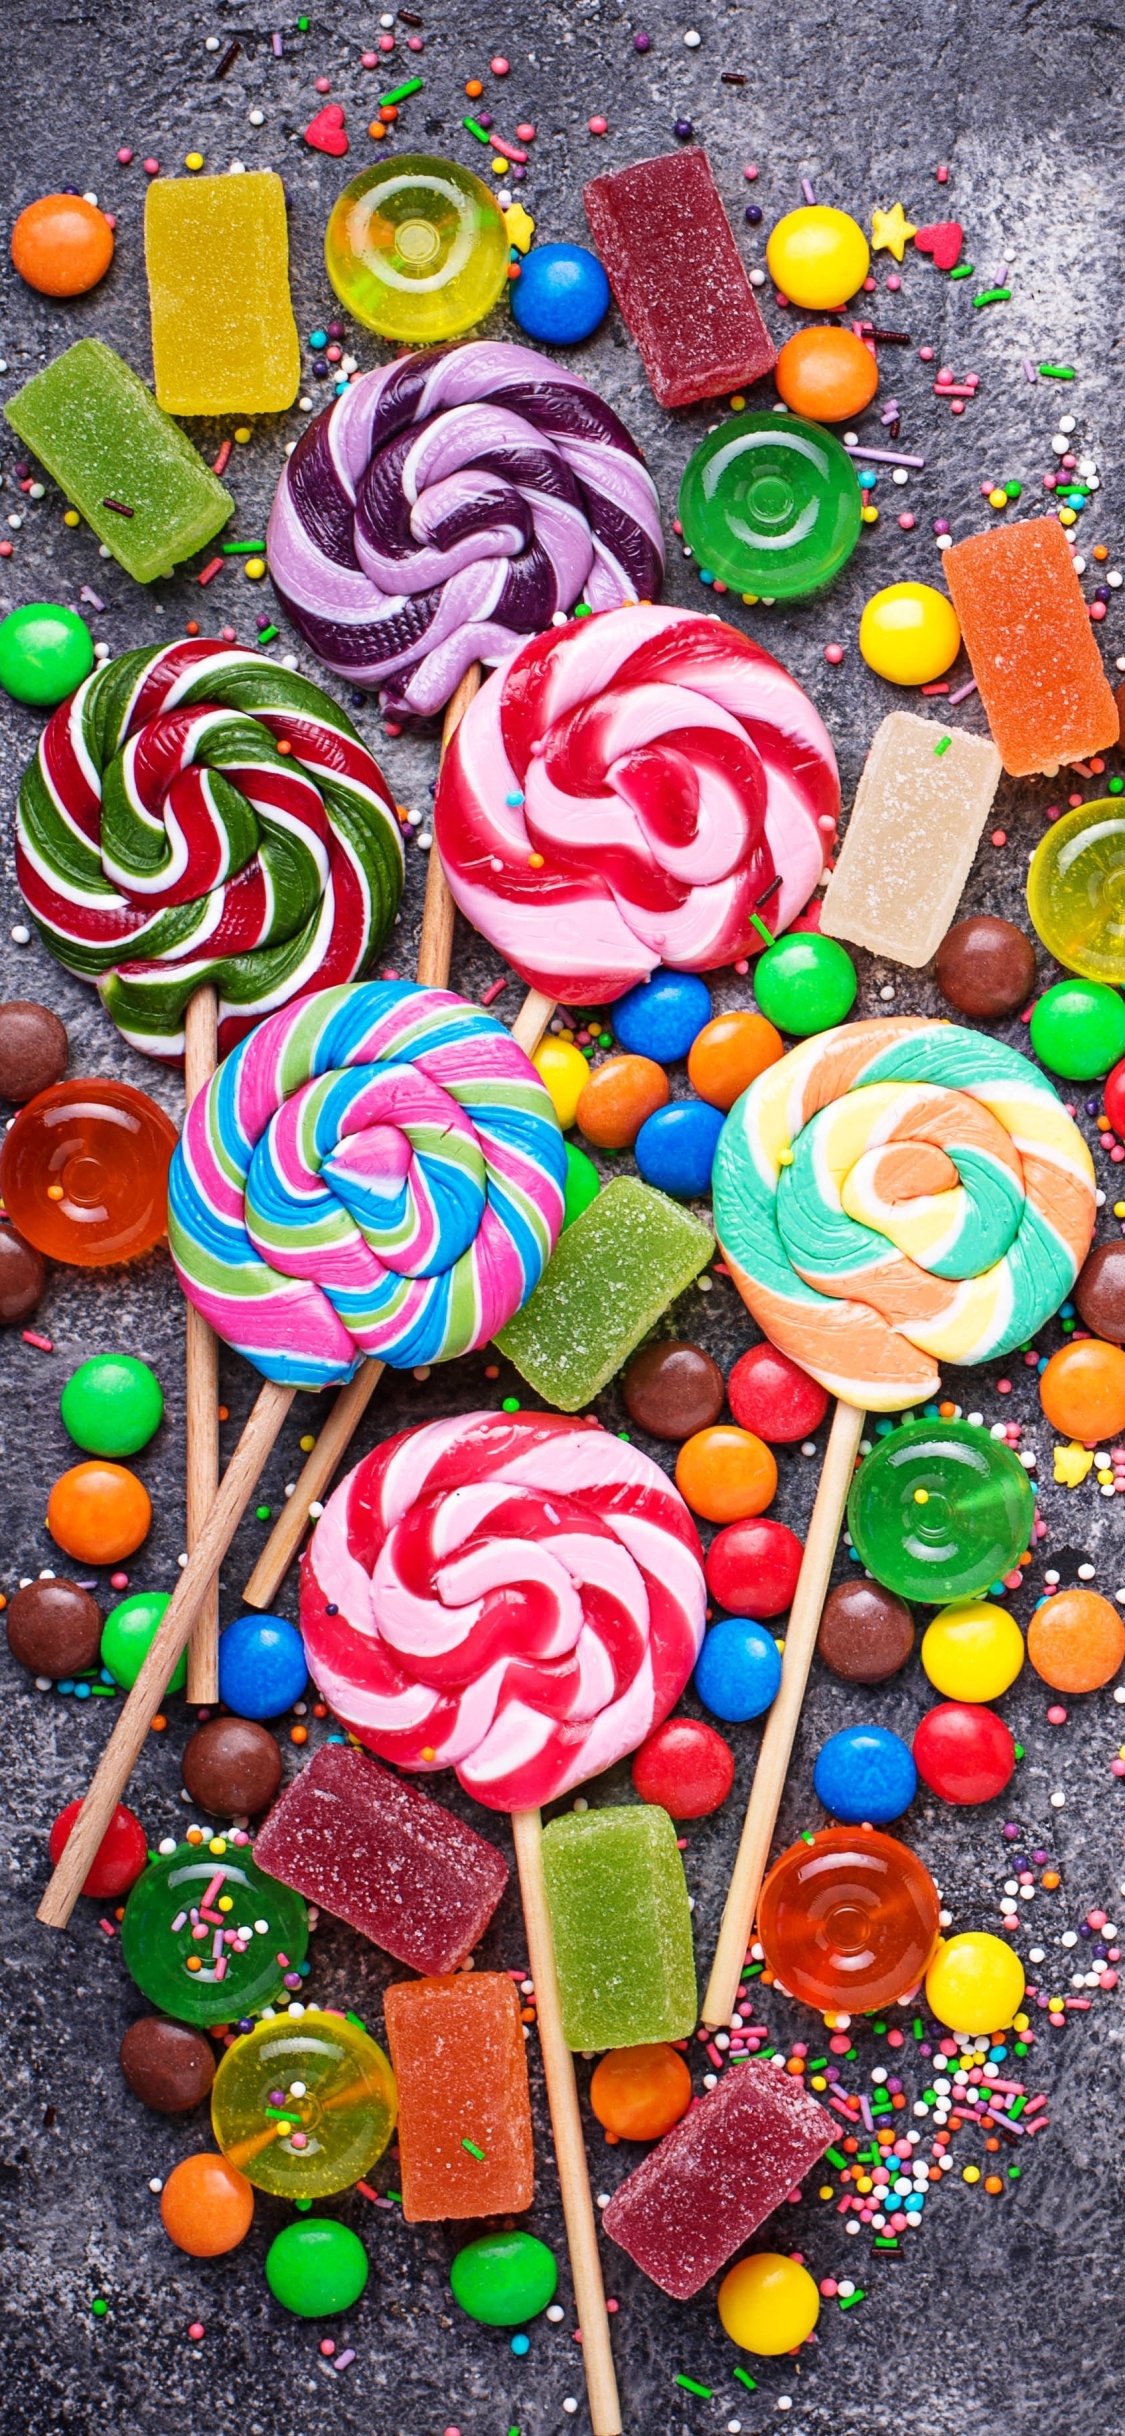 Food candy paradise, Tempting and delicious treats, Sweets for every craving, Indulge in candy delights, 1130x2440 HD Handy